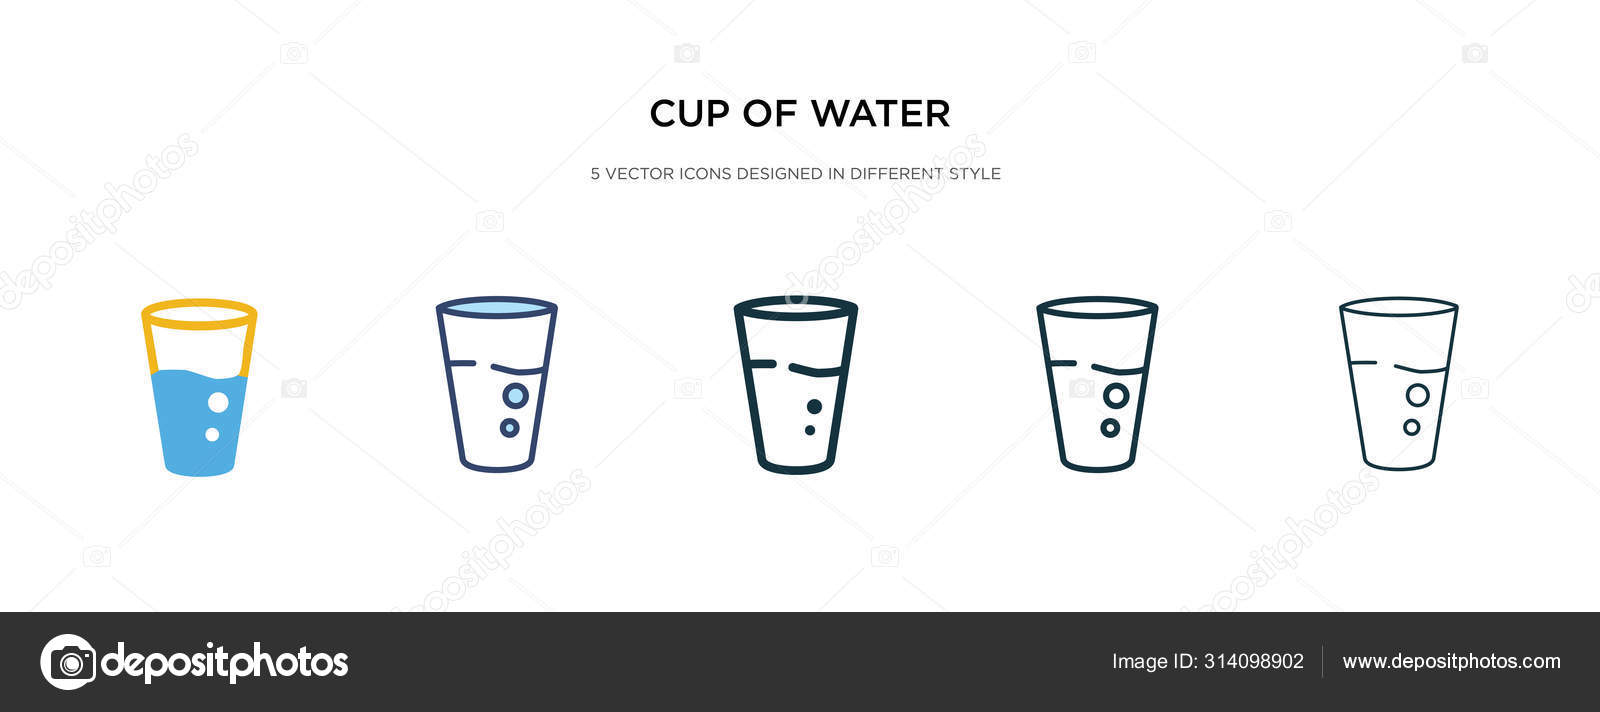 https://st4.depositphotos.com/7968596/31409/v/1600/depositphotos_314098902-stock-illustration-cup-of-water-icon-in.jpg